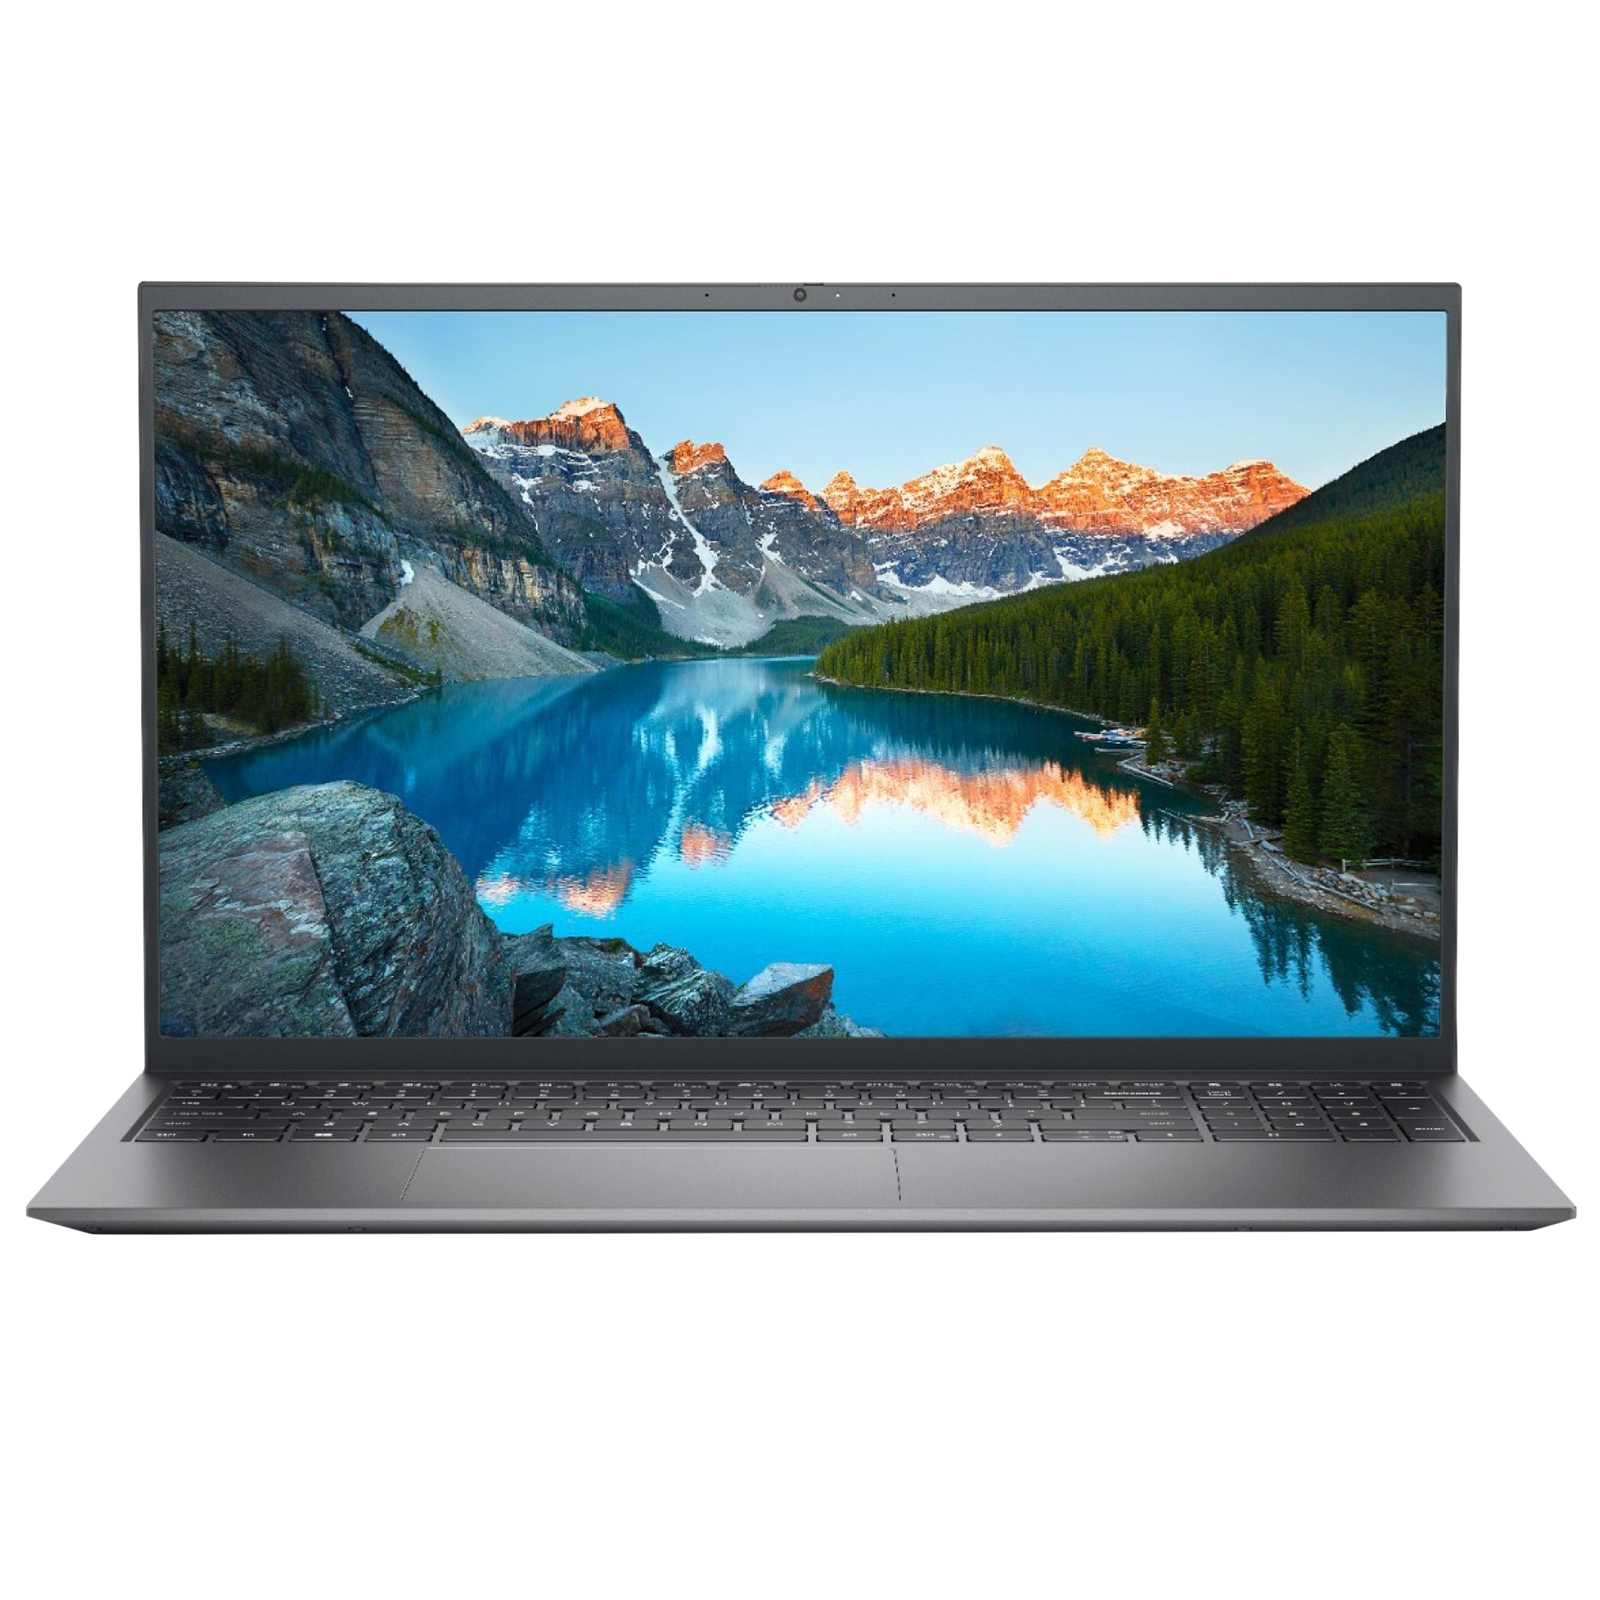 Dell Inspiron 5518 Intel Core i5 11th Gen (15.6 inch, 16GB, 512GB, Windows 10, MS Office 2019, NVIDIA GeForce MX450 Graphics, FHD LED-Backlit Display, Platinum Silver, D560480WIN9S)_1